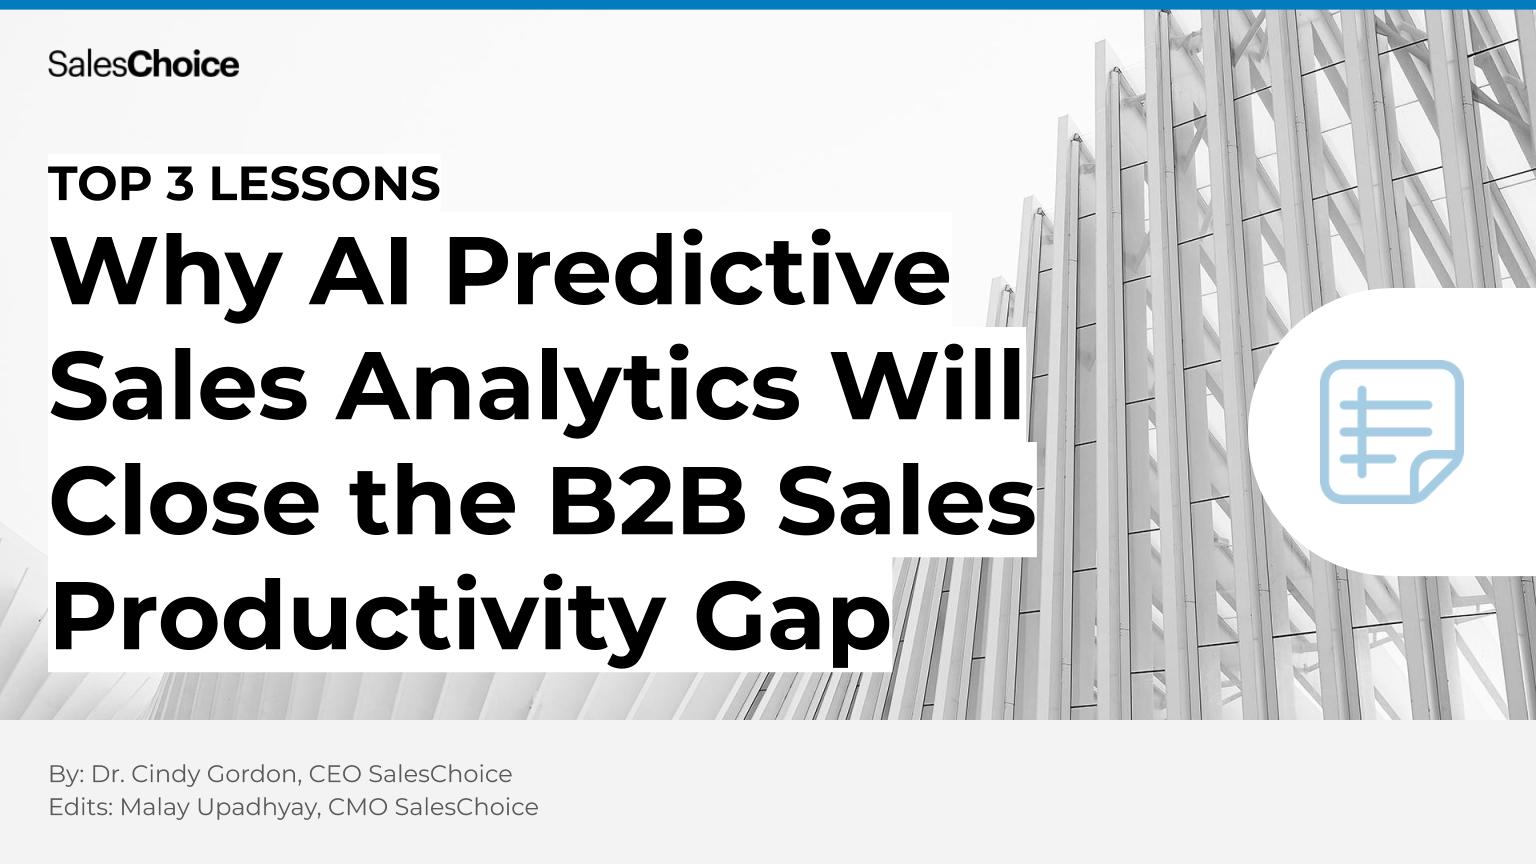 White paper: Why AI Predictive Sales Analytics Will Close the B2B Sales Productivity Gap: Top 3 Lessons